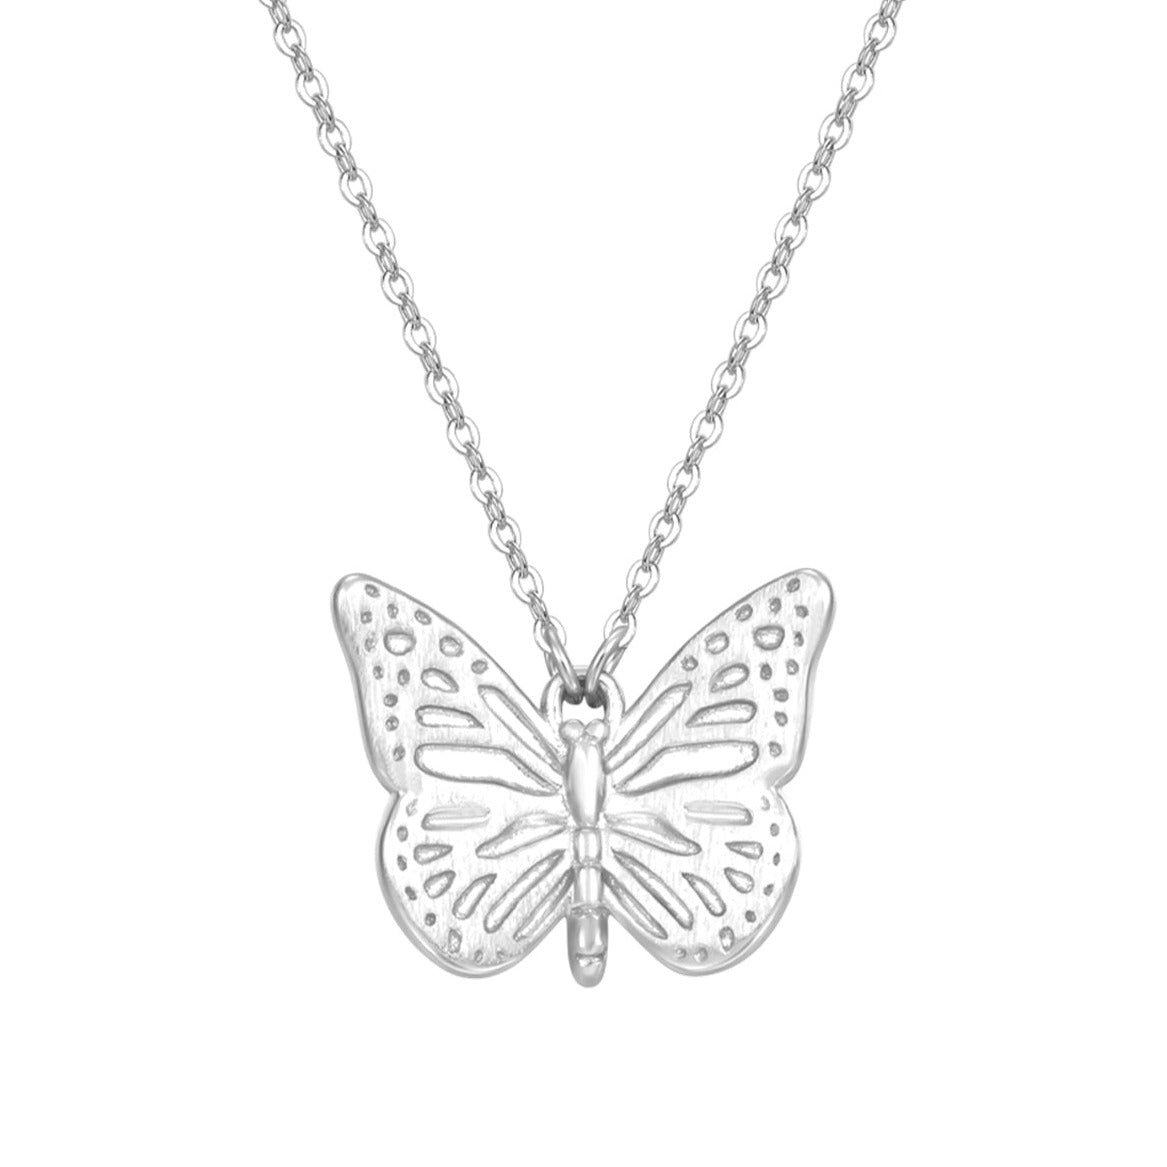 Butterfly Pendant Necklaces Sterling Silver